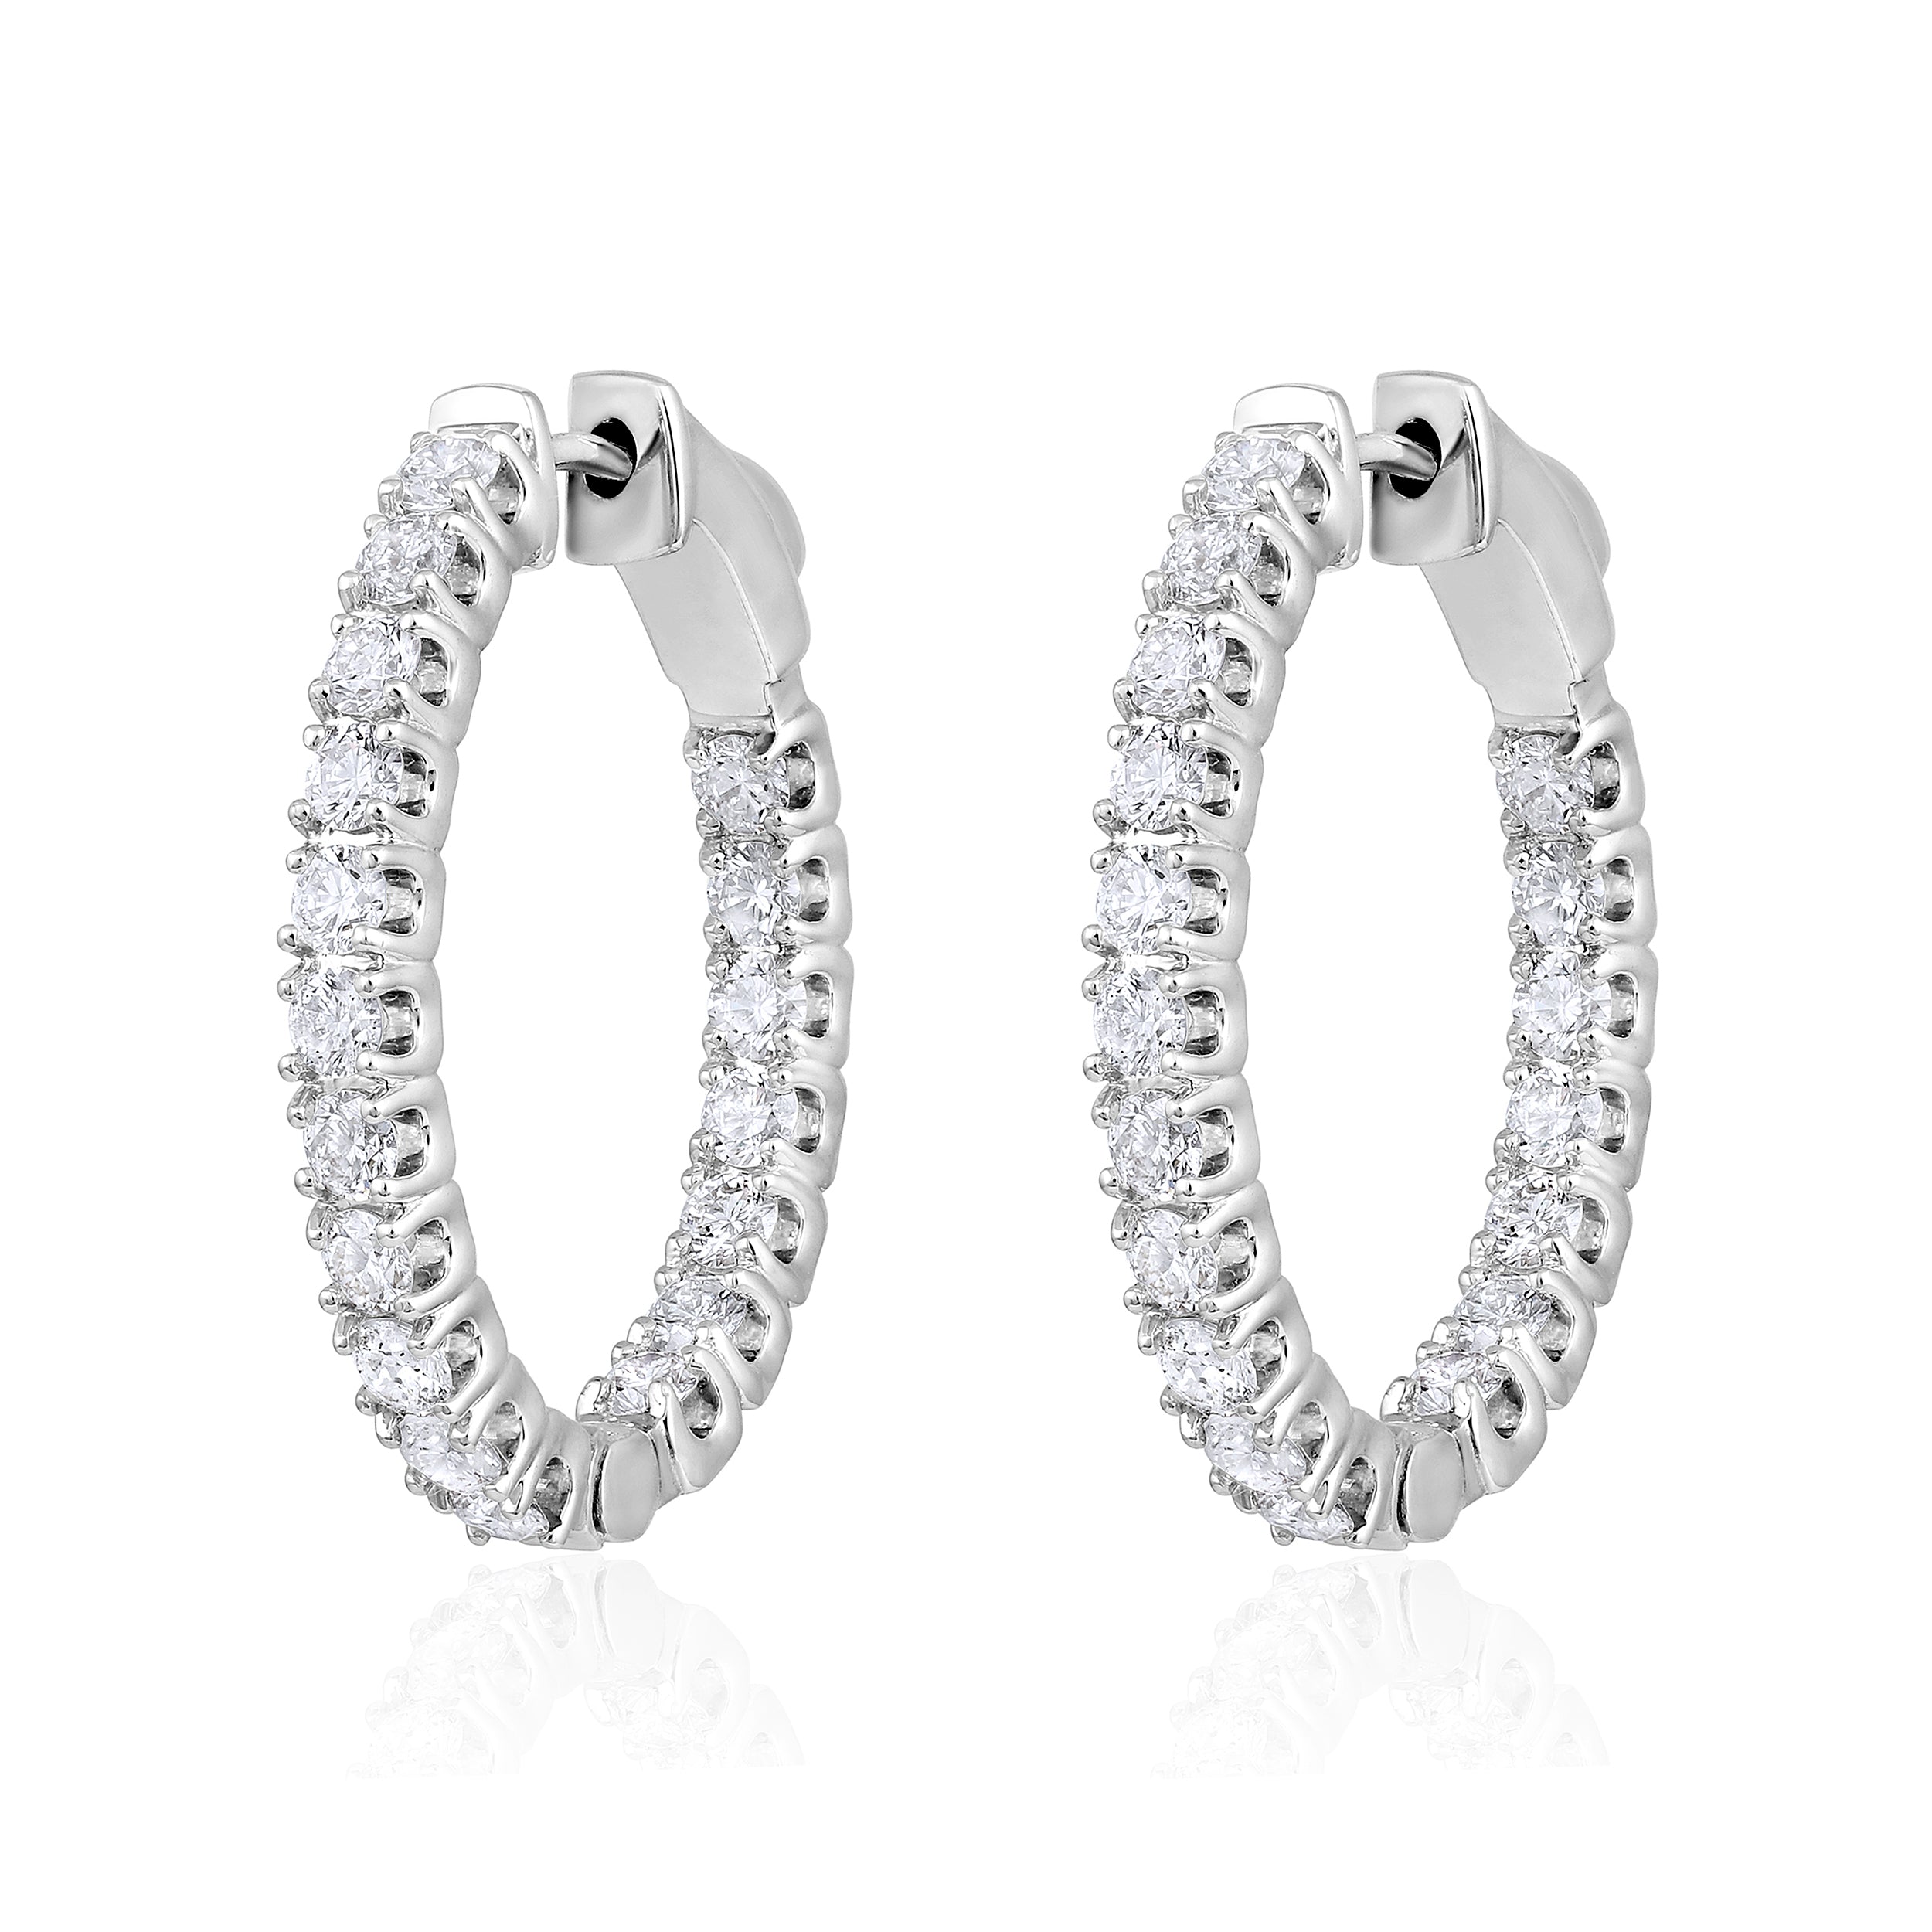 Certified 14K Gold 2ct Natural Diamond G-SI Oval Inside Out 26mm Hoop White Earrings